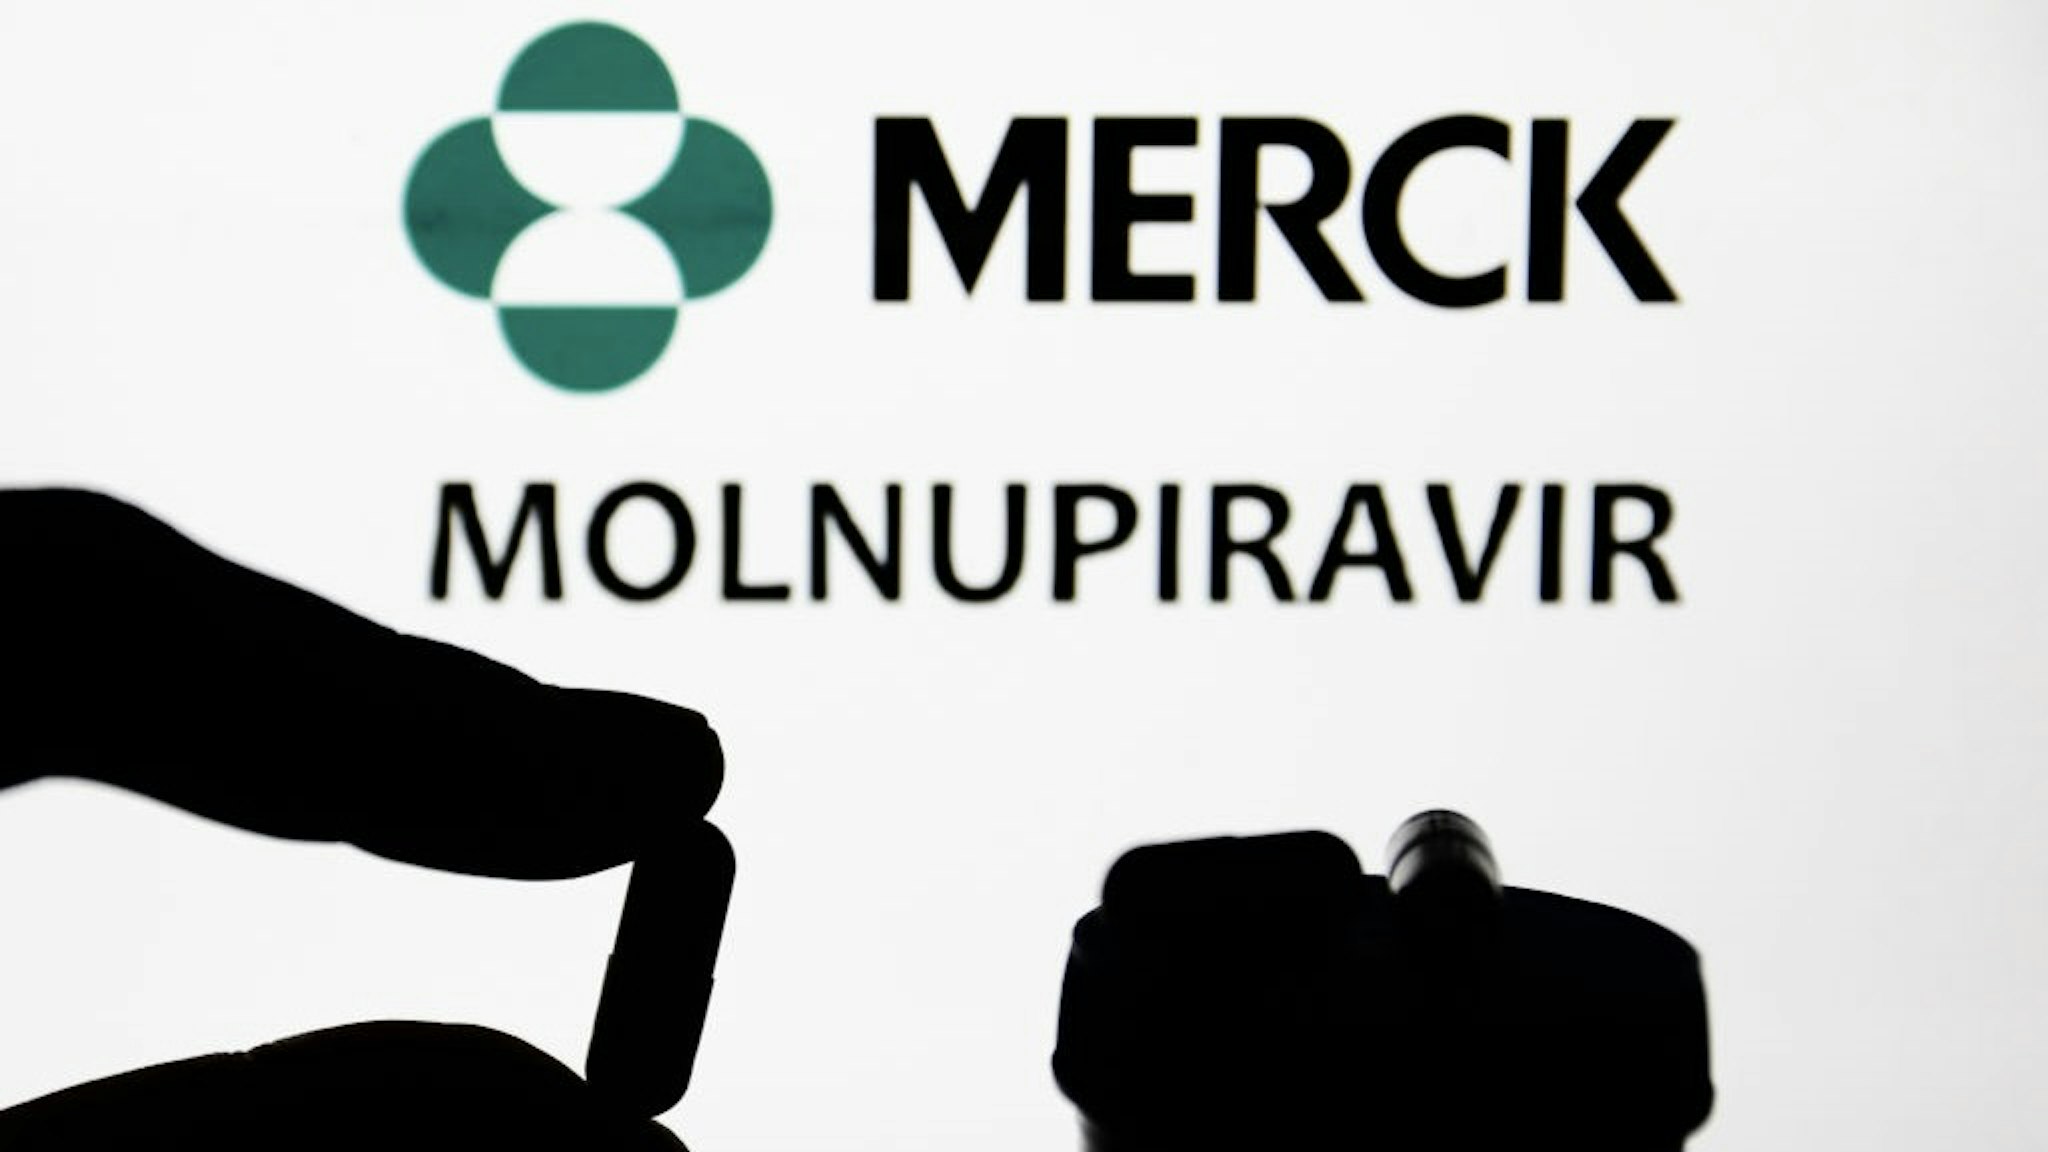 Molnupiravir Photo Illustrations Medicine pill is seen with Merck logo and the wrod 'molnupiravir' displayed on a screen in the background in this illustration photo taken in Poland on November 5, 2021. (Photo by Jakub Porzycki/NurPhoto via Getty Images) NurPhoto / Contributor